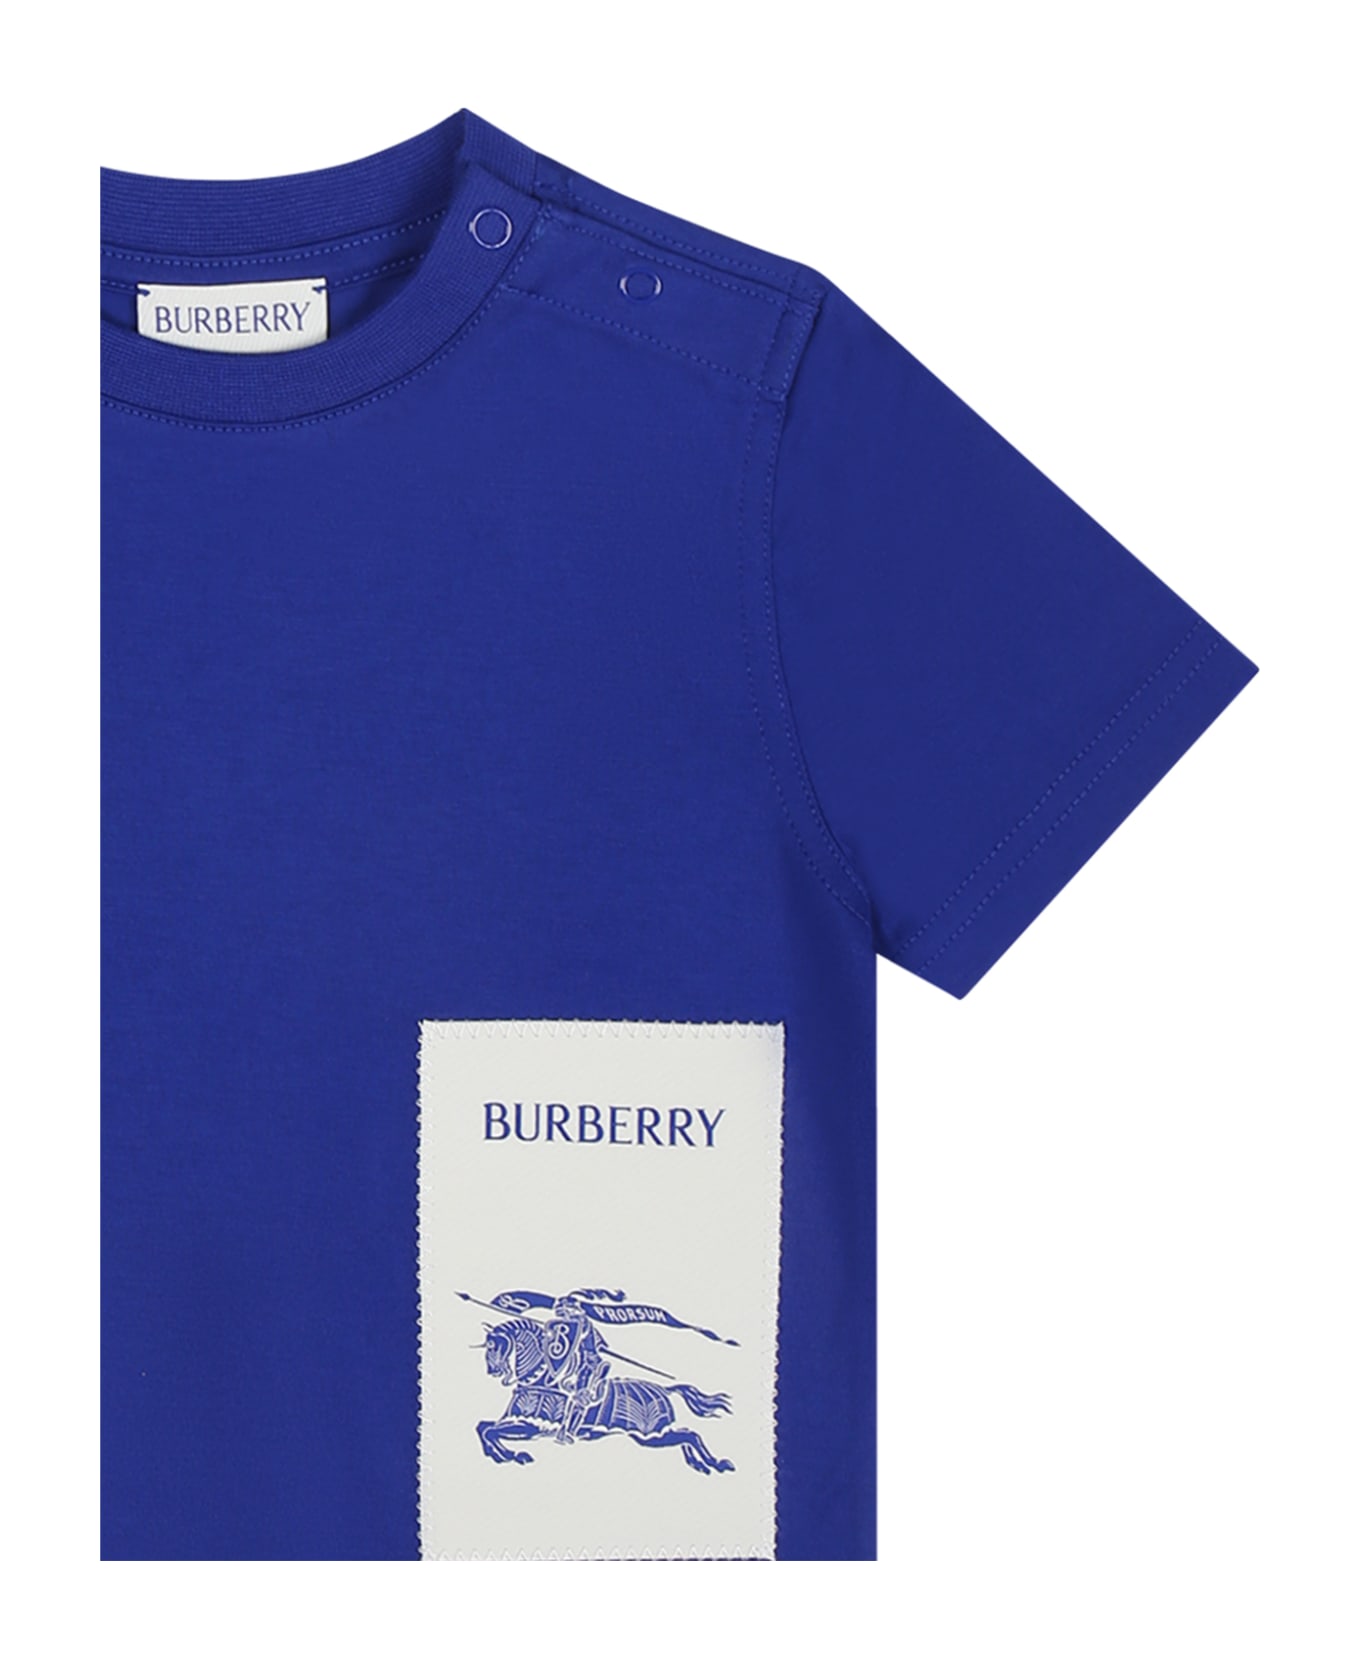 Burberry Blue T-shirt For Baby Boy With Logo - Blue